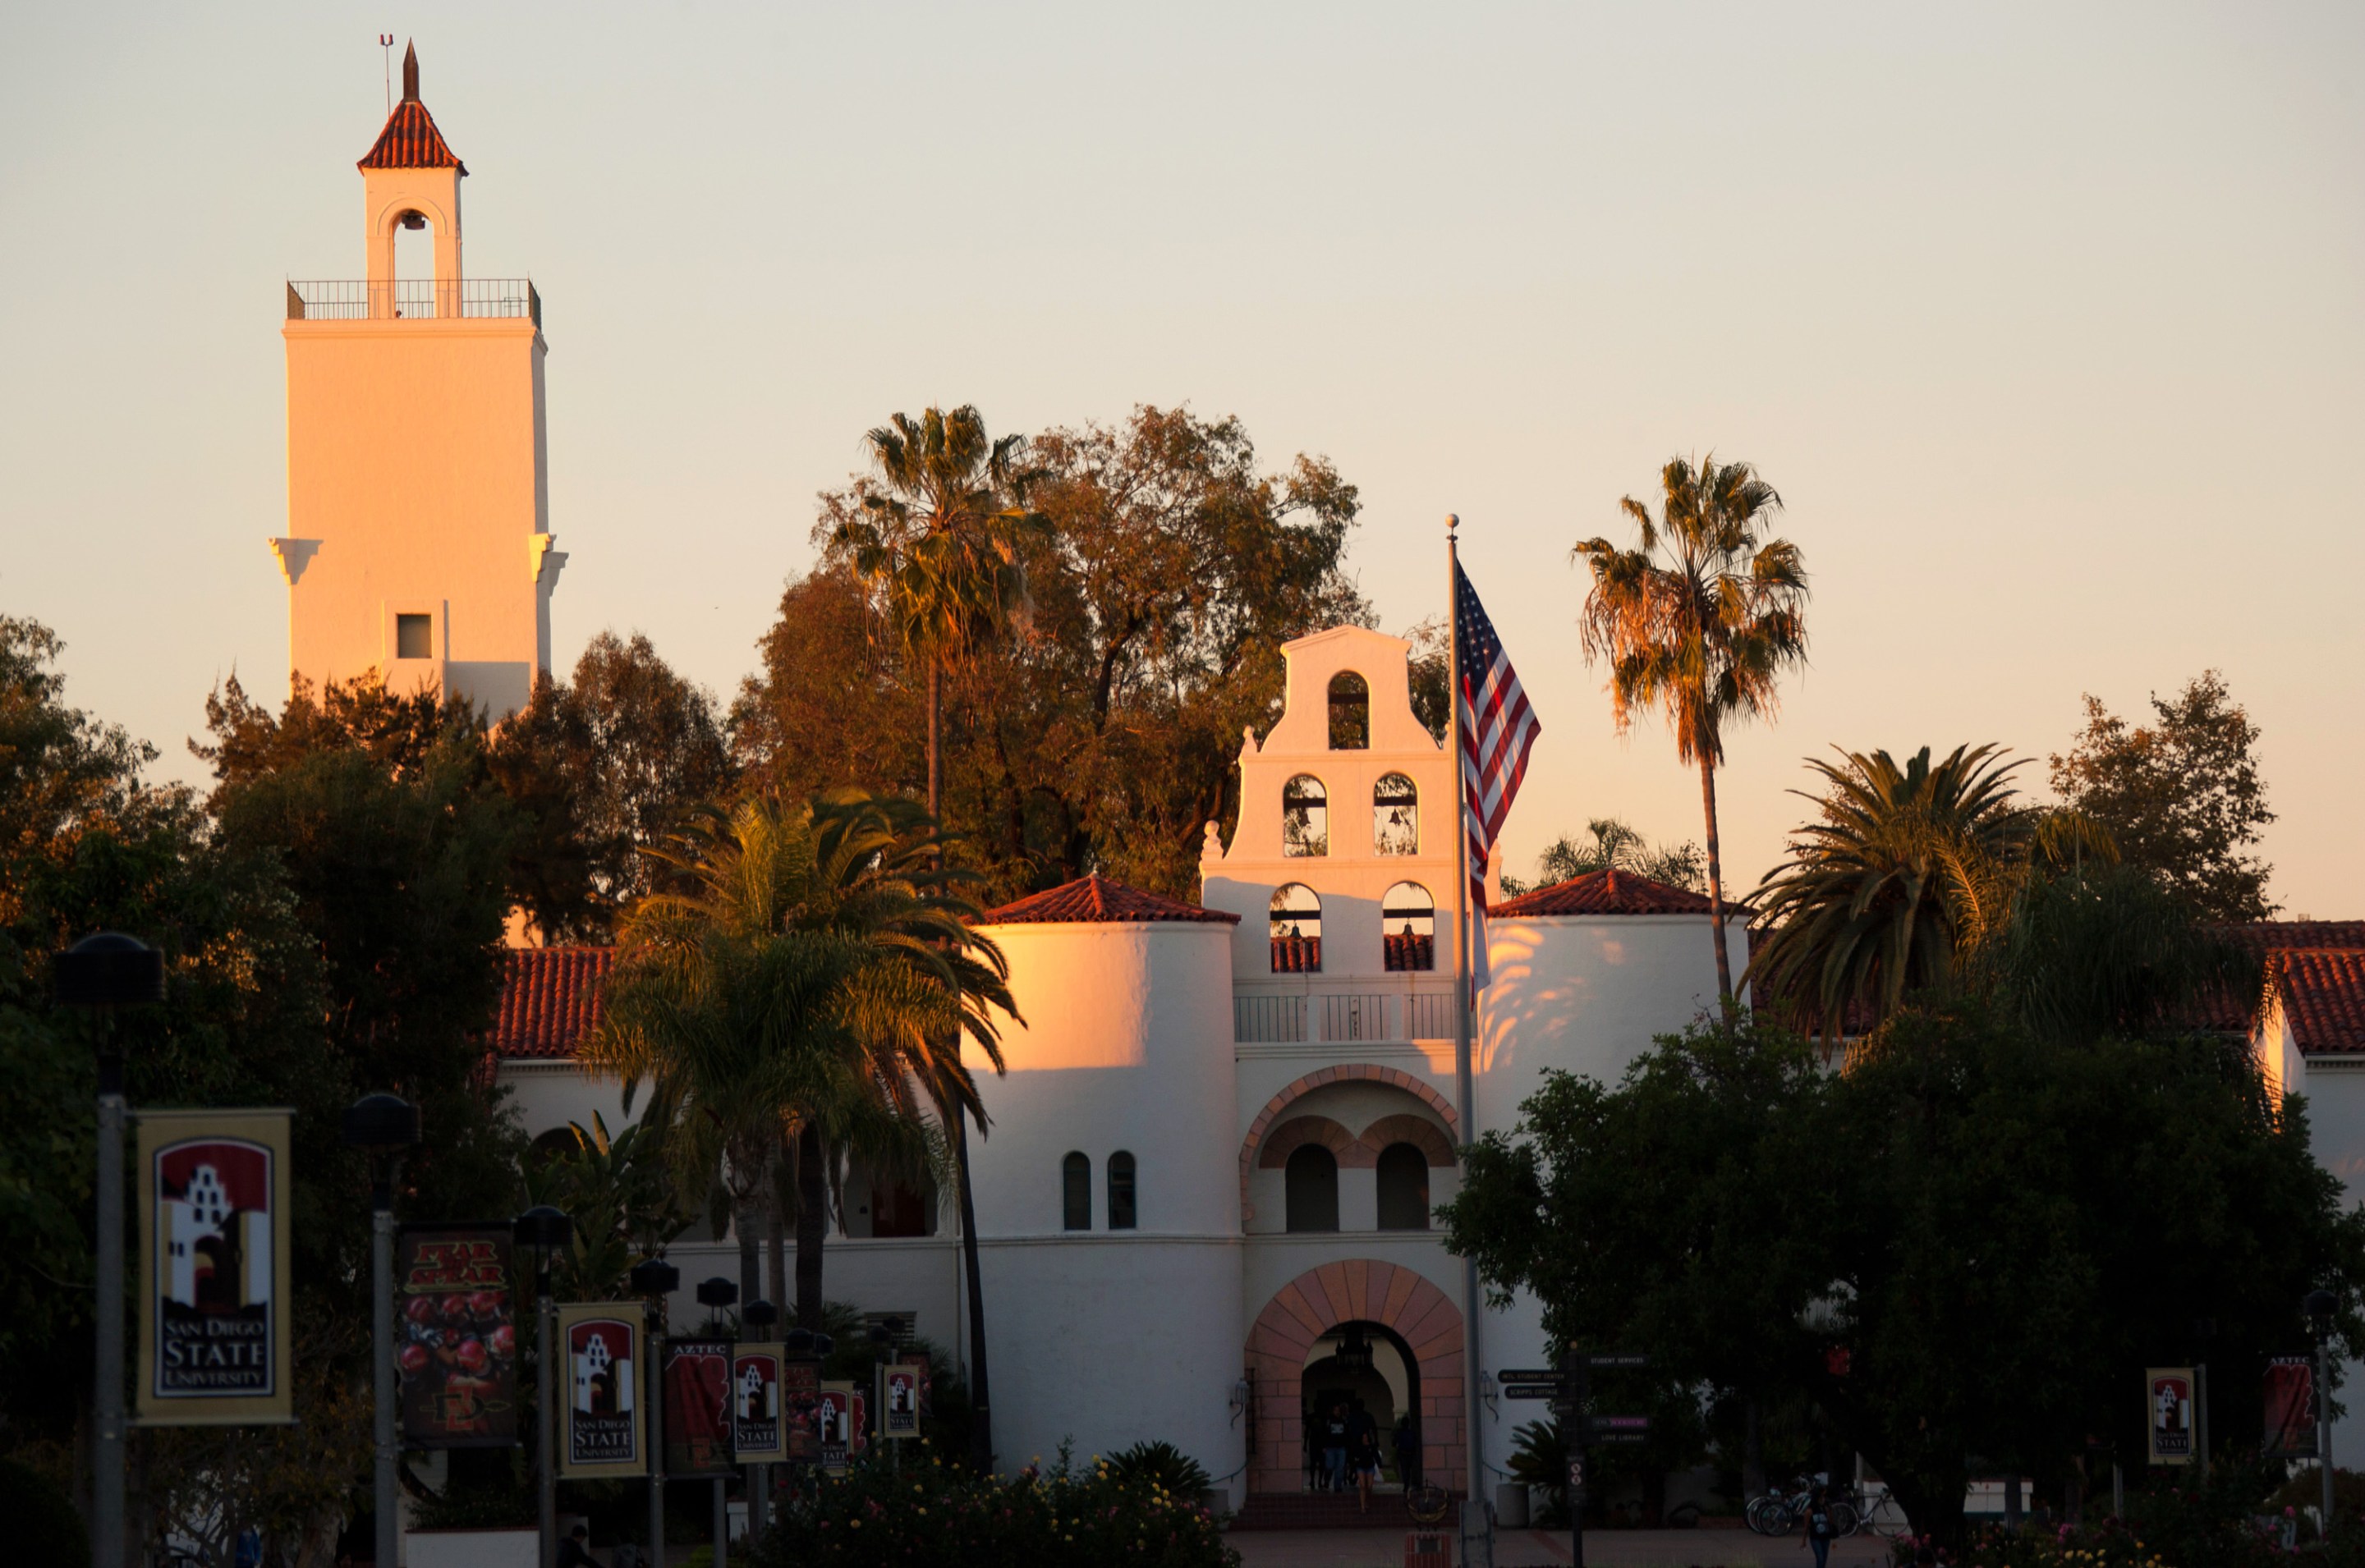 Hepner Hall and Hardy Tower on the campus of San Diego State Univeristy near the Aztecs' home court inside the Viejas Arena on November 21, 2012 in San Diego, California. (Photo by Kent C. Horner/Getty Images)